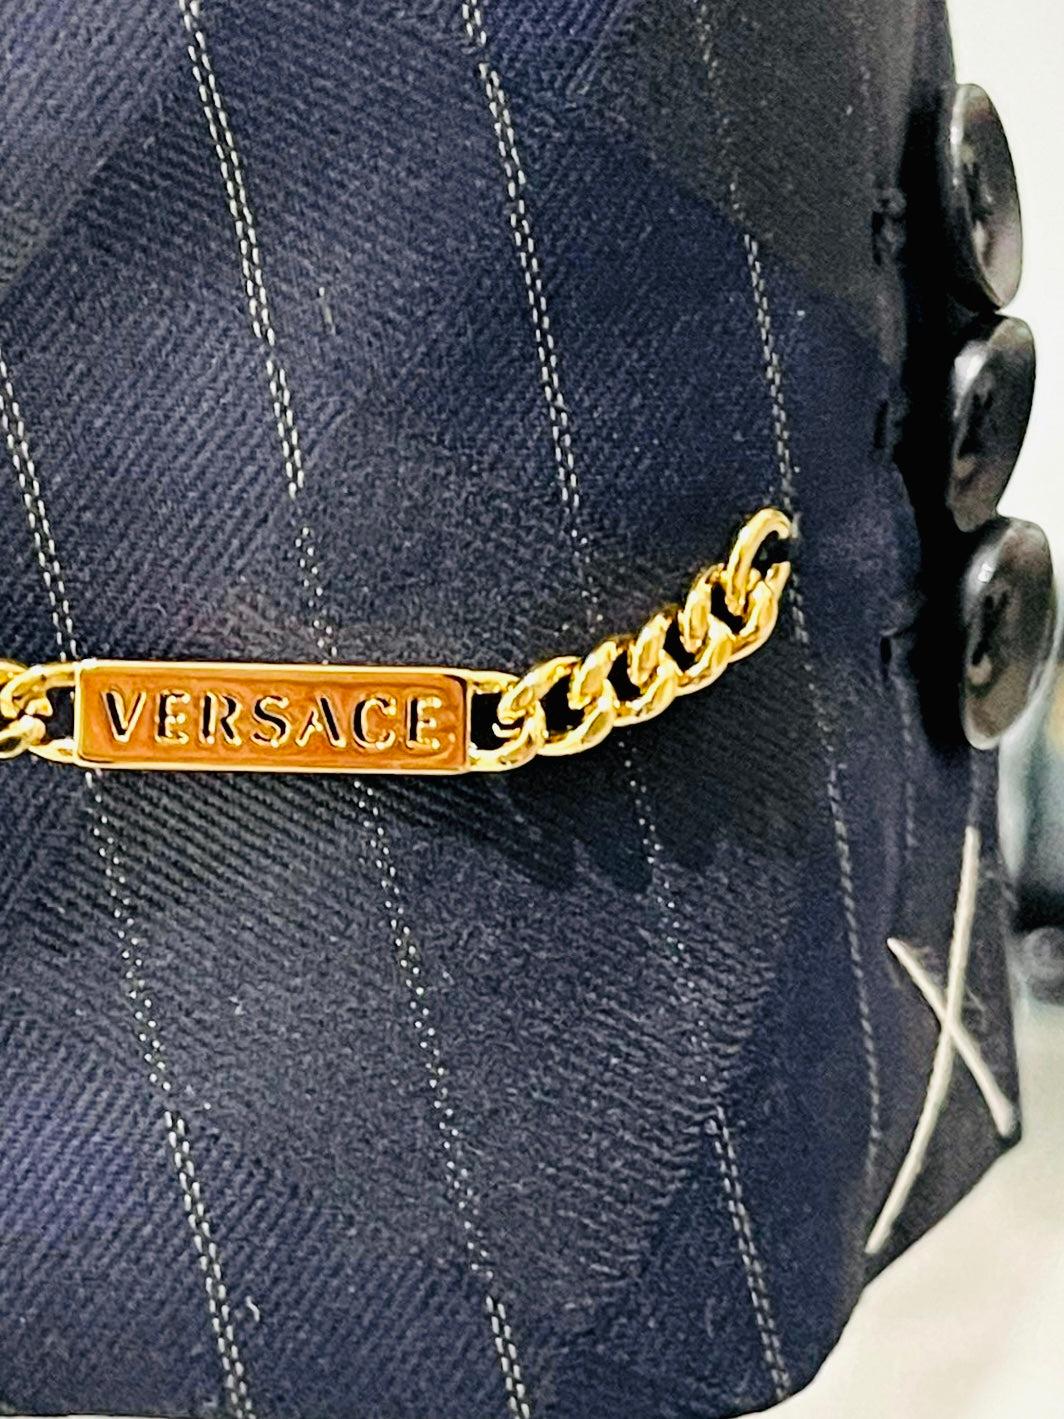 Brand New - Versace Suit - Jacket & Matching Trousers 5